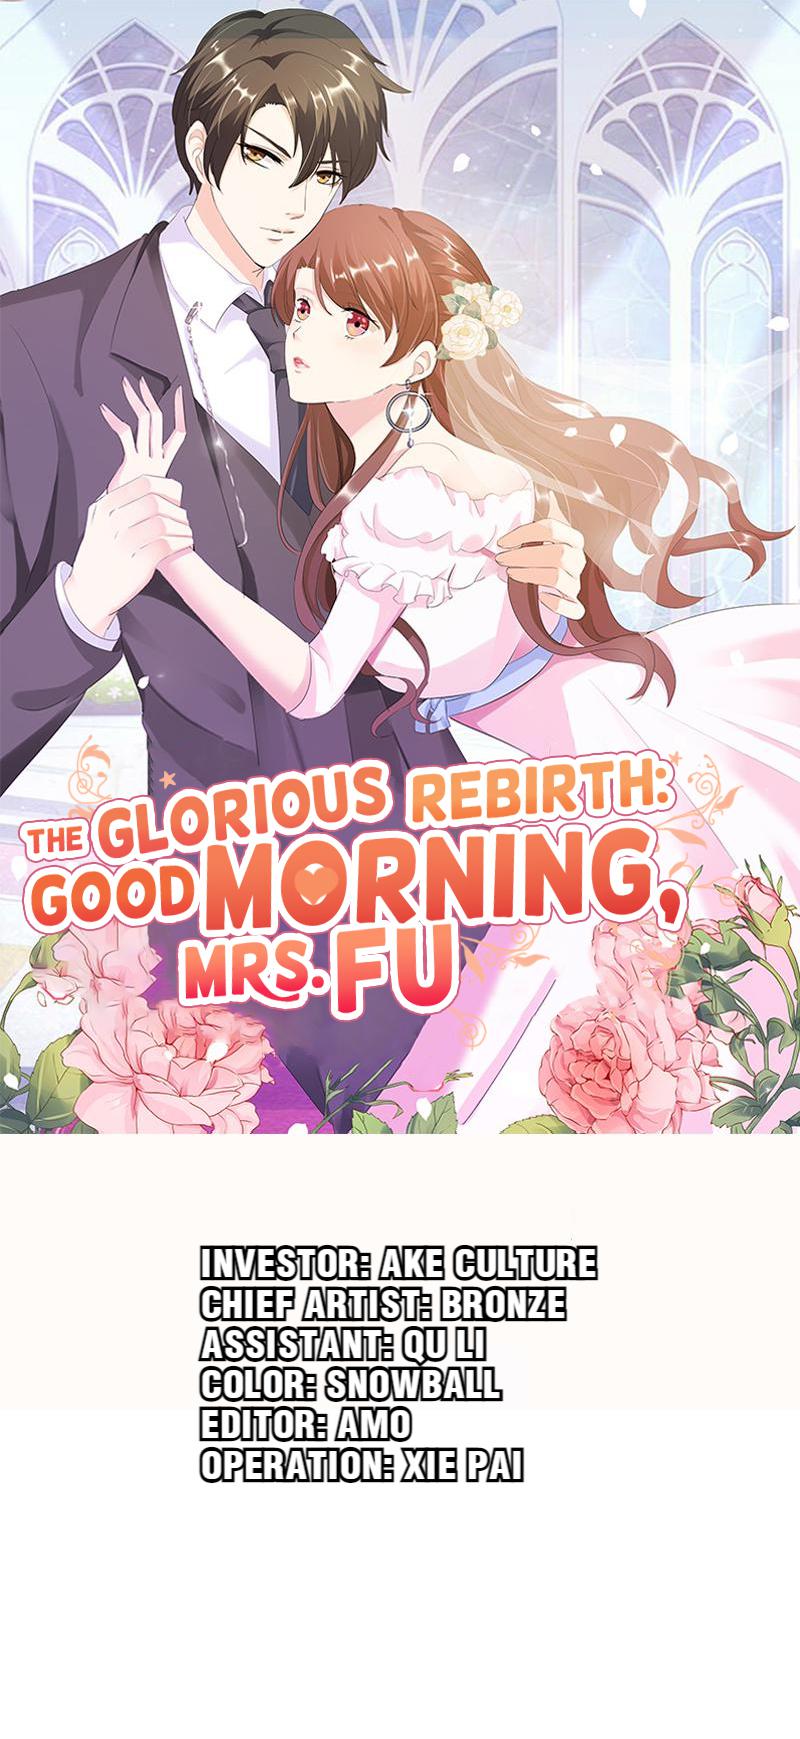 The Glorious Rebirth: Good Morning, Mrs. Fu - Page 1